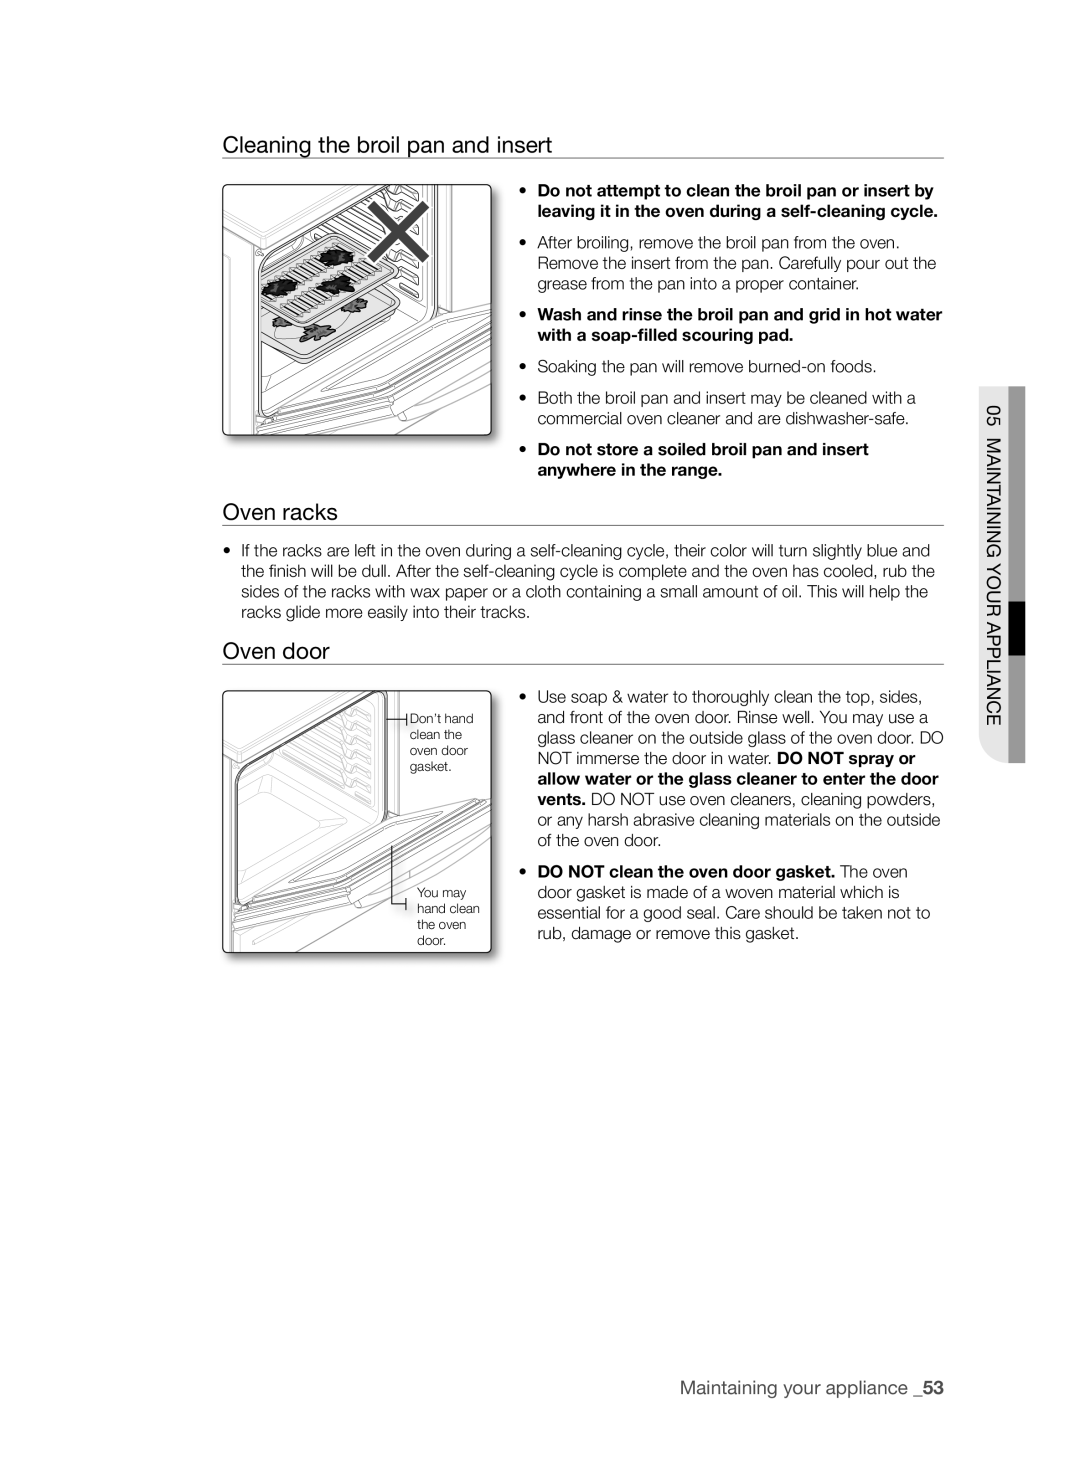 Samsung FTQ307NWGX user manual Cleaning the broil pan and insert, Oven racks, Oven door, Maintaining your appliance 